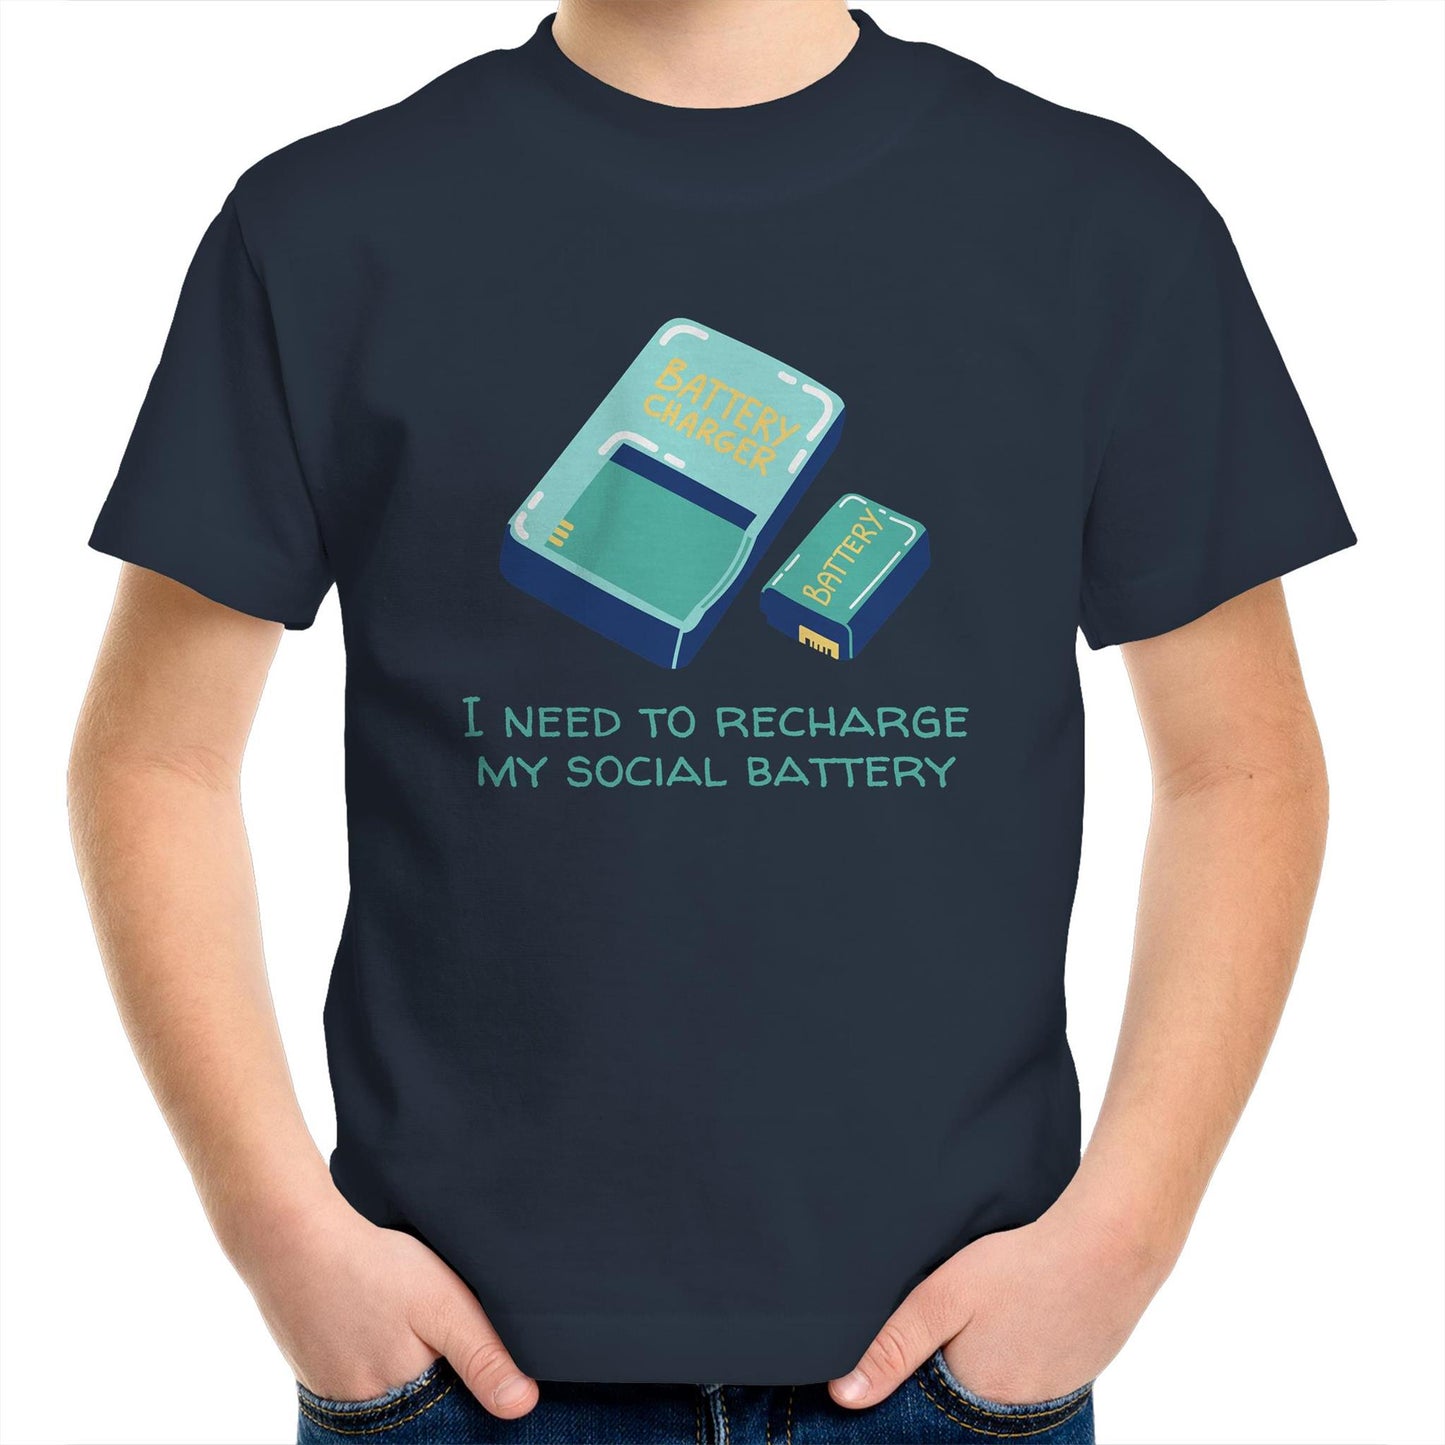 Recharge My Social Battery - Kids Youth Crew T-Shirt Navy Kids Youth T-shirt Funny